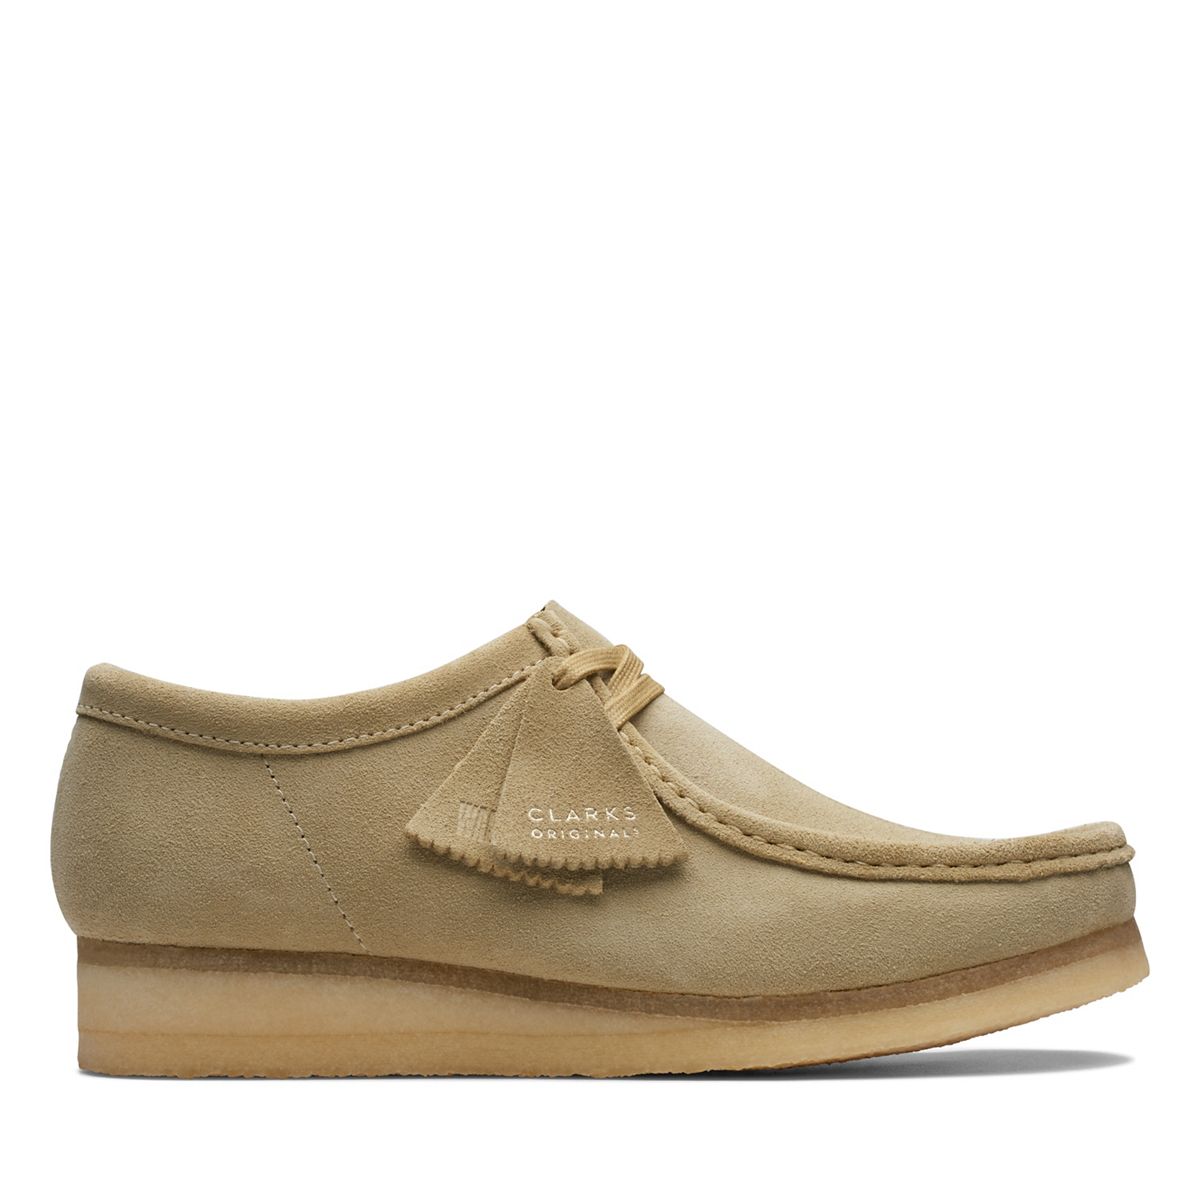 Hates Tarmfunktion Radioaktiv Wallabee Maple Suede - Clarks Canada Official Site | Clarks Shoes